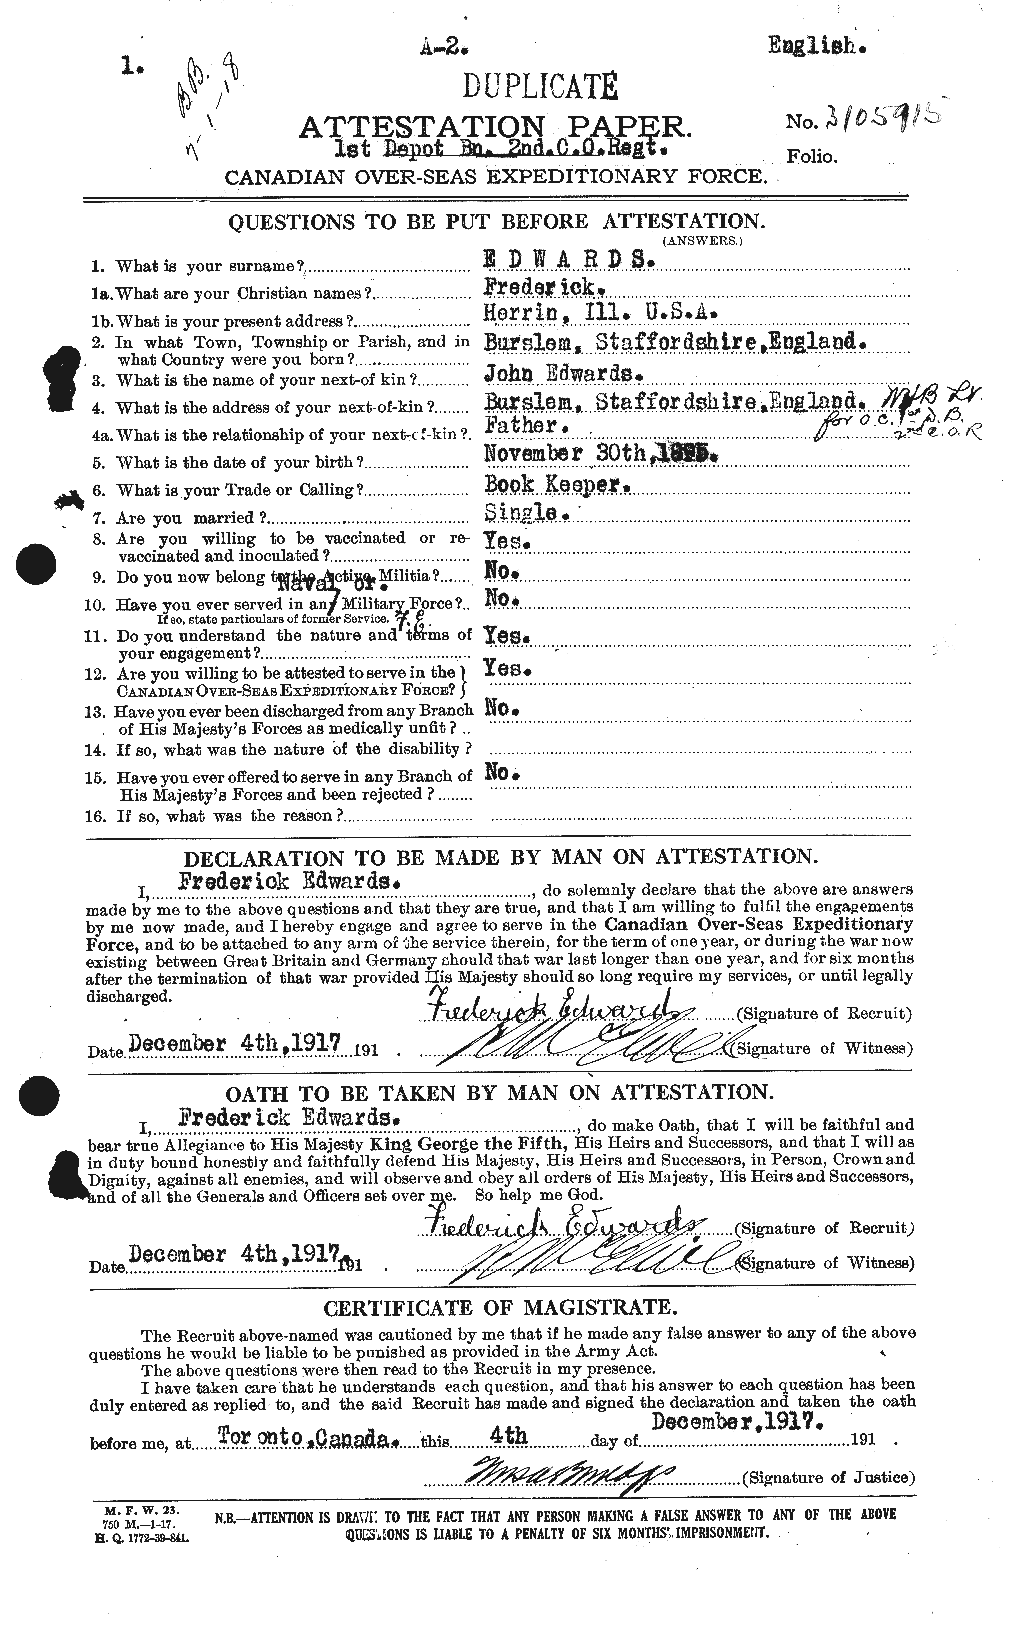 Personnel Records of the First World War - CEF 309069a